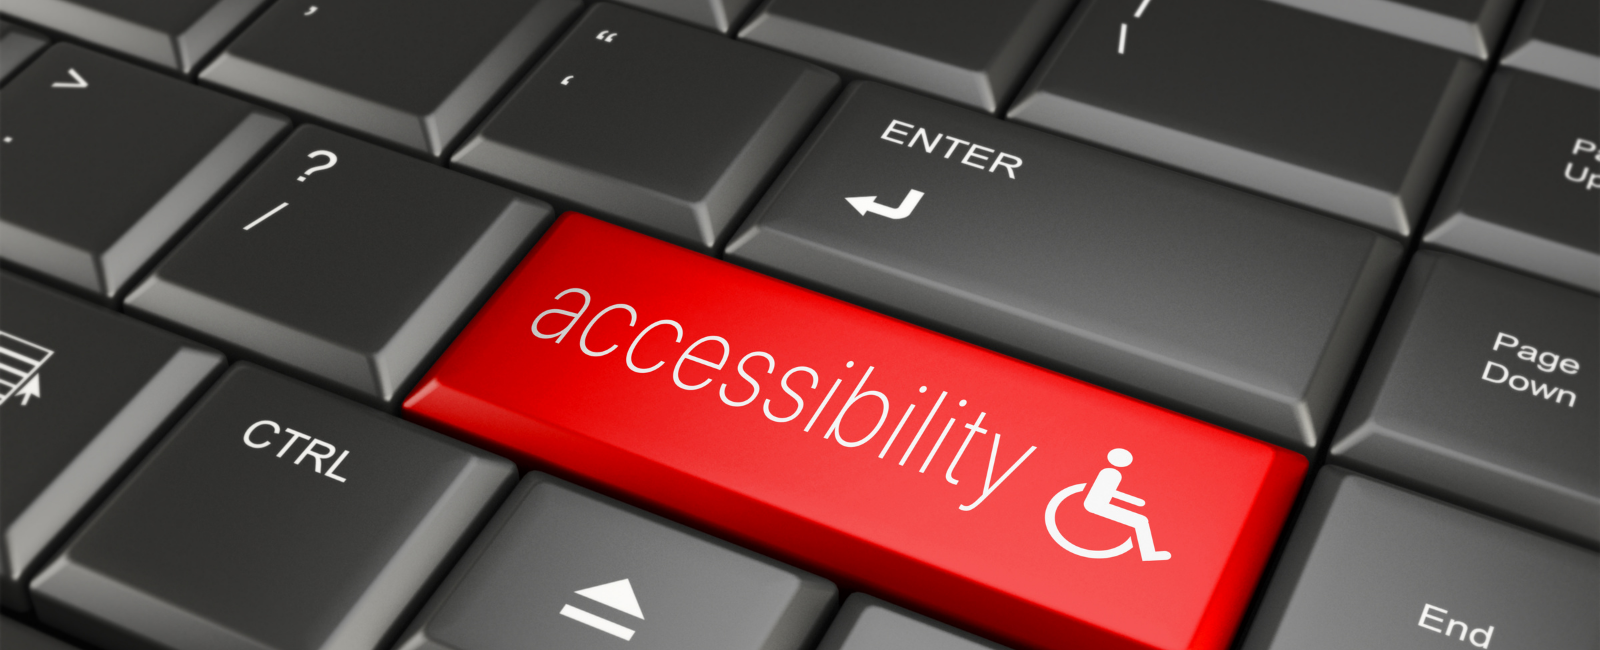 Accessibility page banner